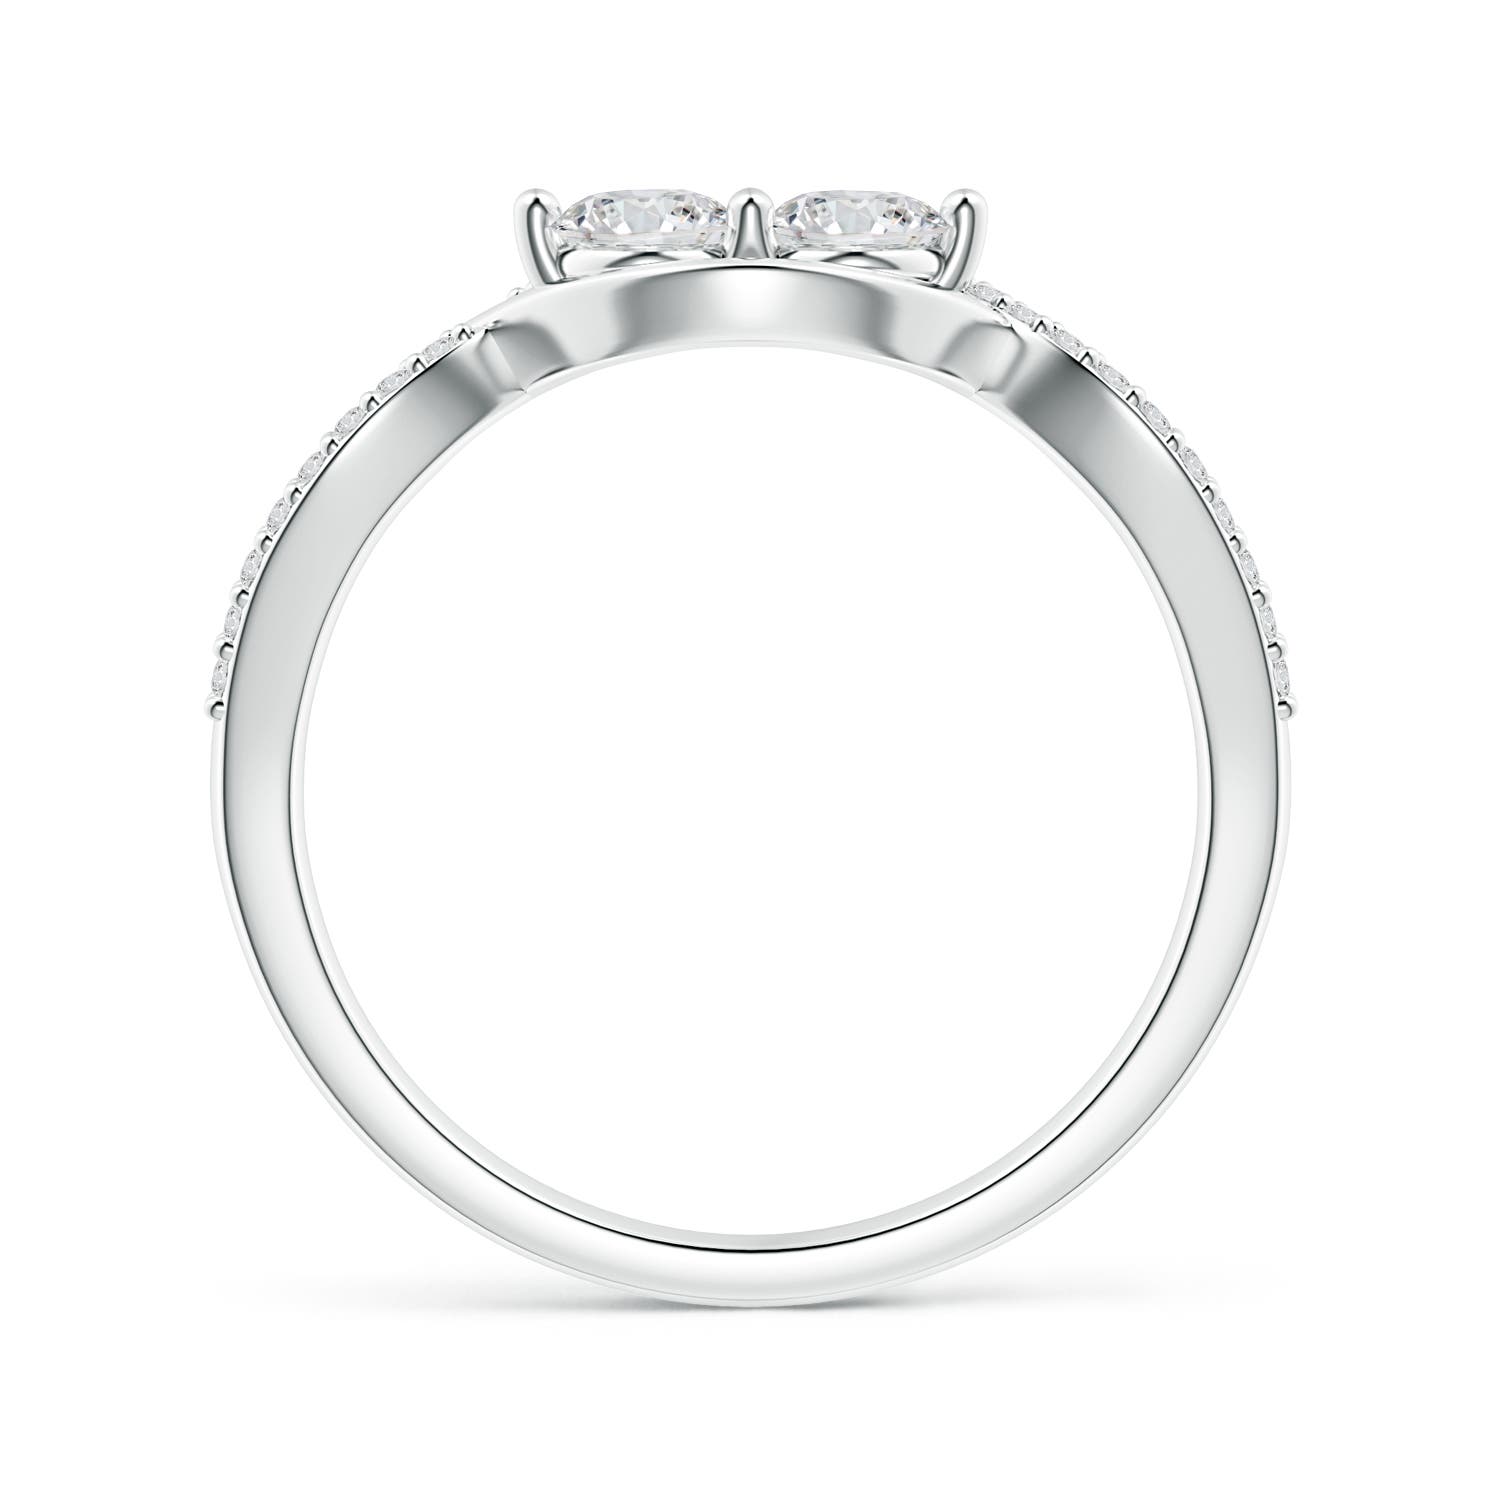 H, SI2 / 0.54 CT / 14 KT White Gold